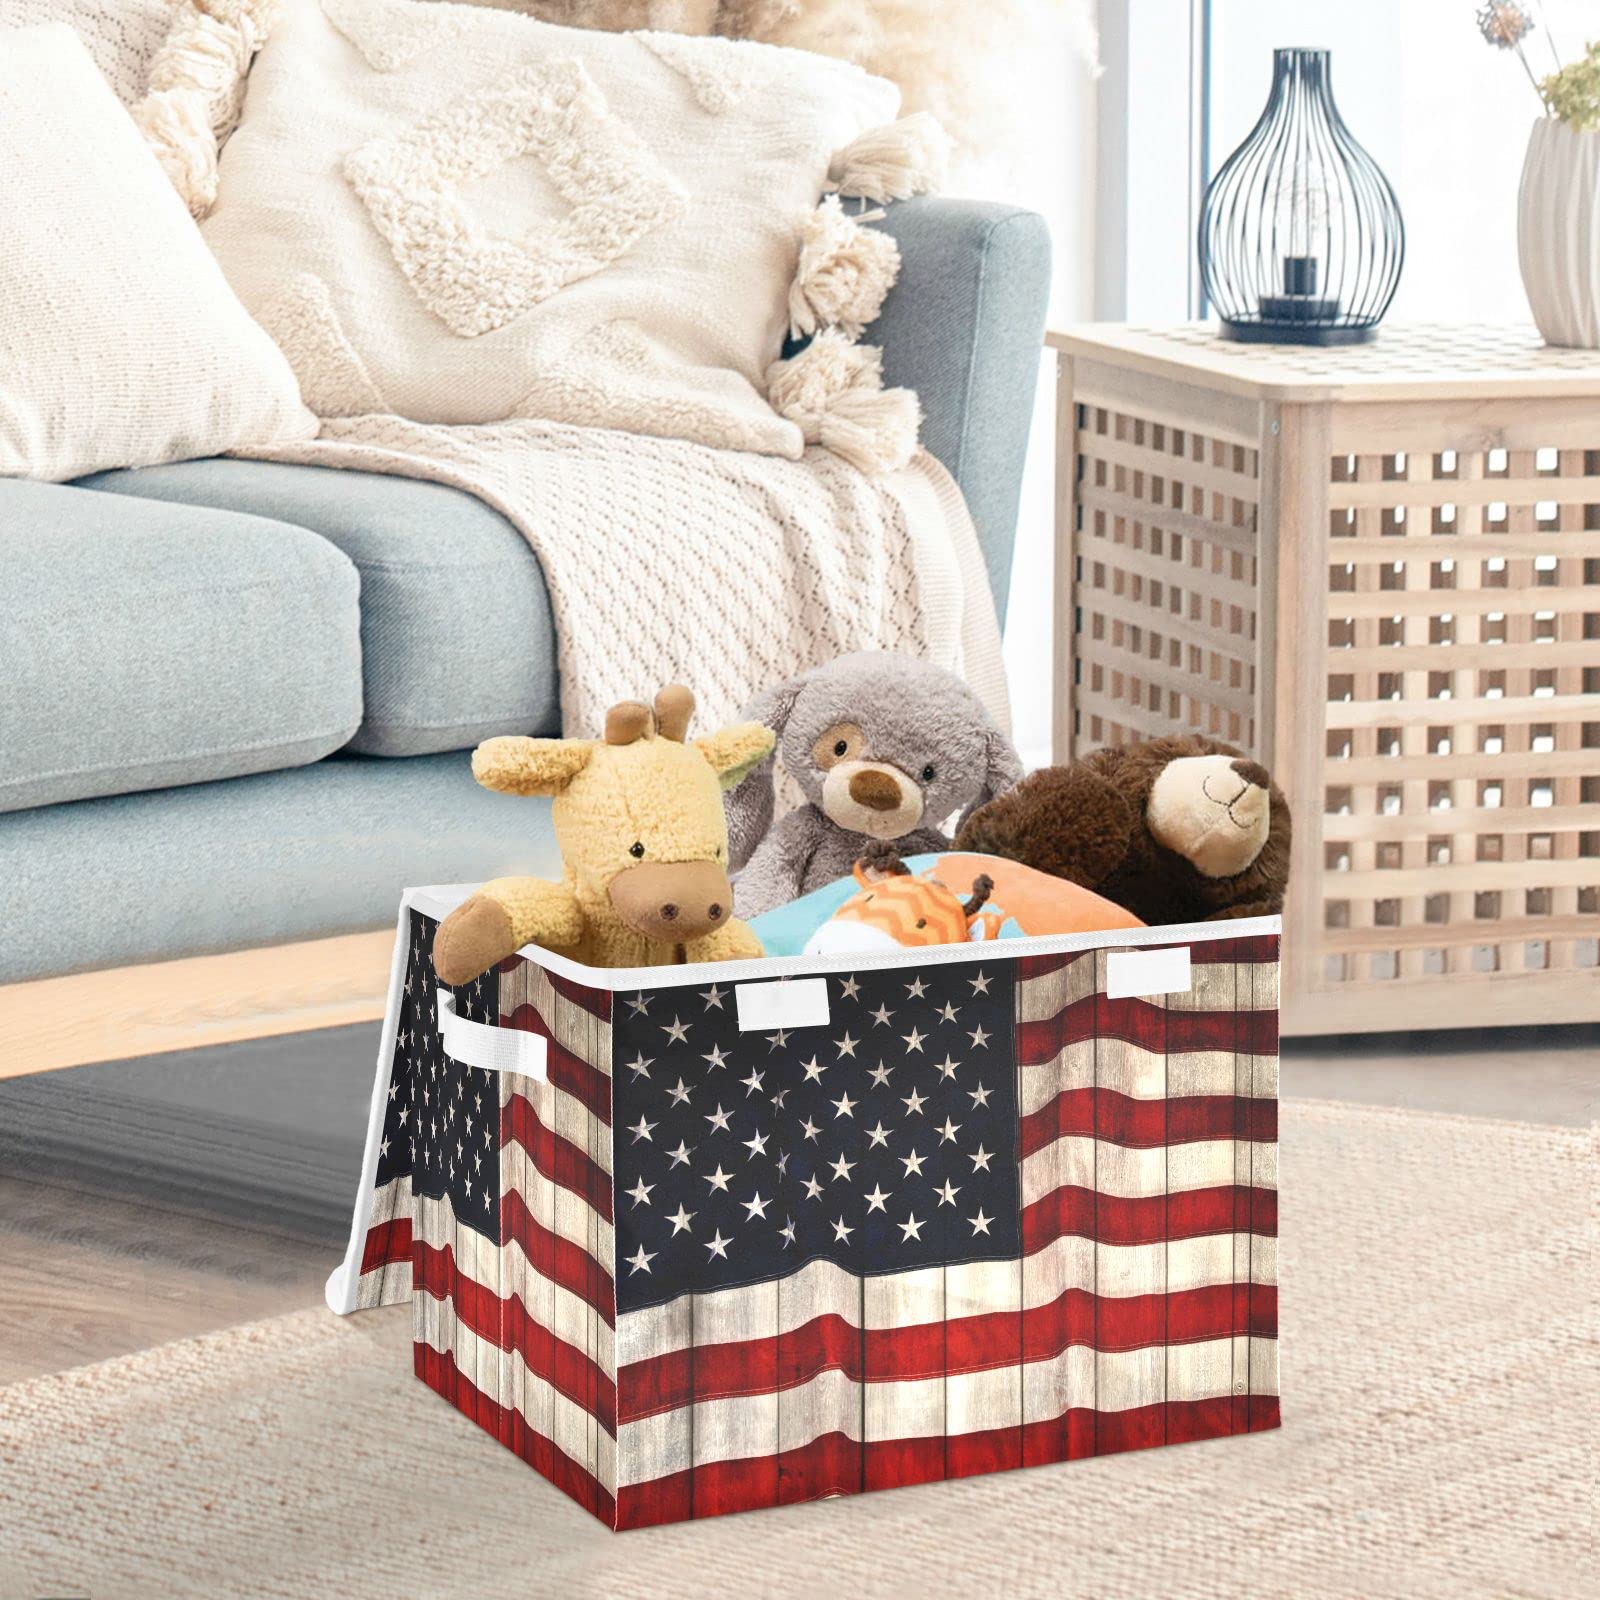 Gredecor Large Storage Basket Bins with Lid American Flag Wooden Pattern Storage Boxes Organizer with Handle 16.5"x12.6"x11.8" Collapsible Storage Cube for Toys Bedroom Nursery Home